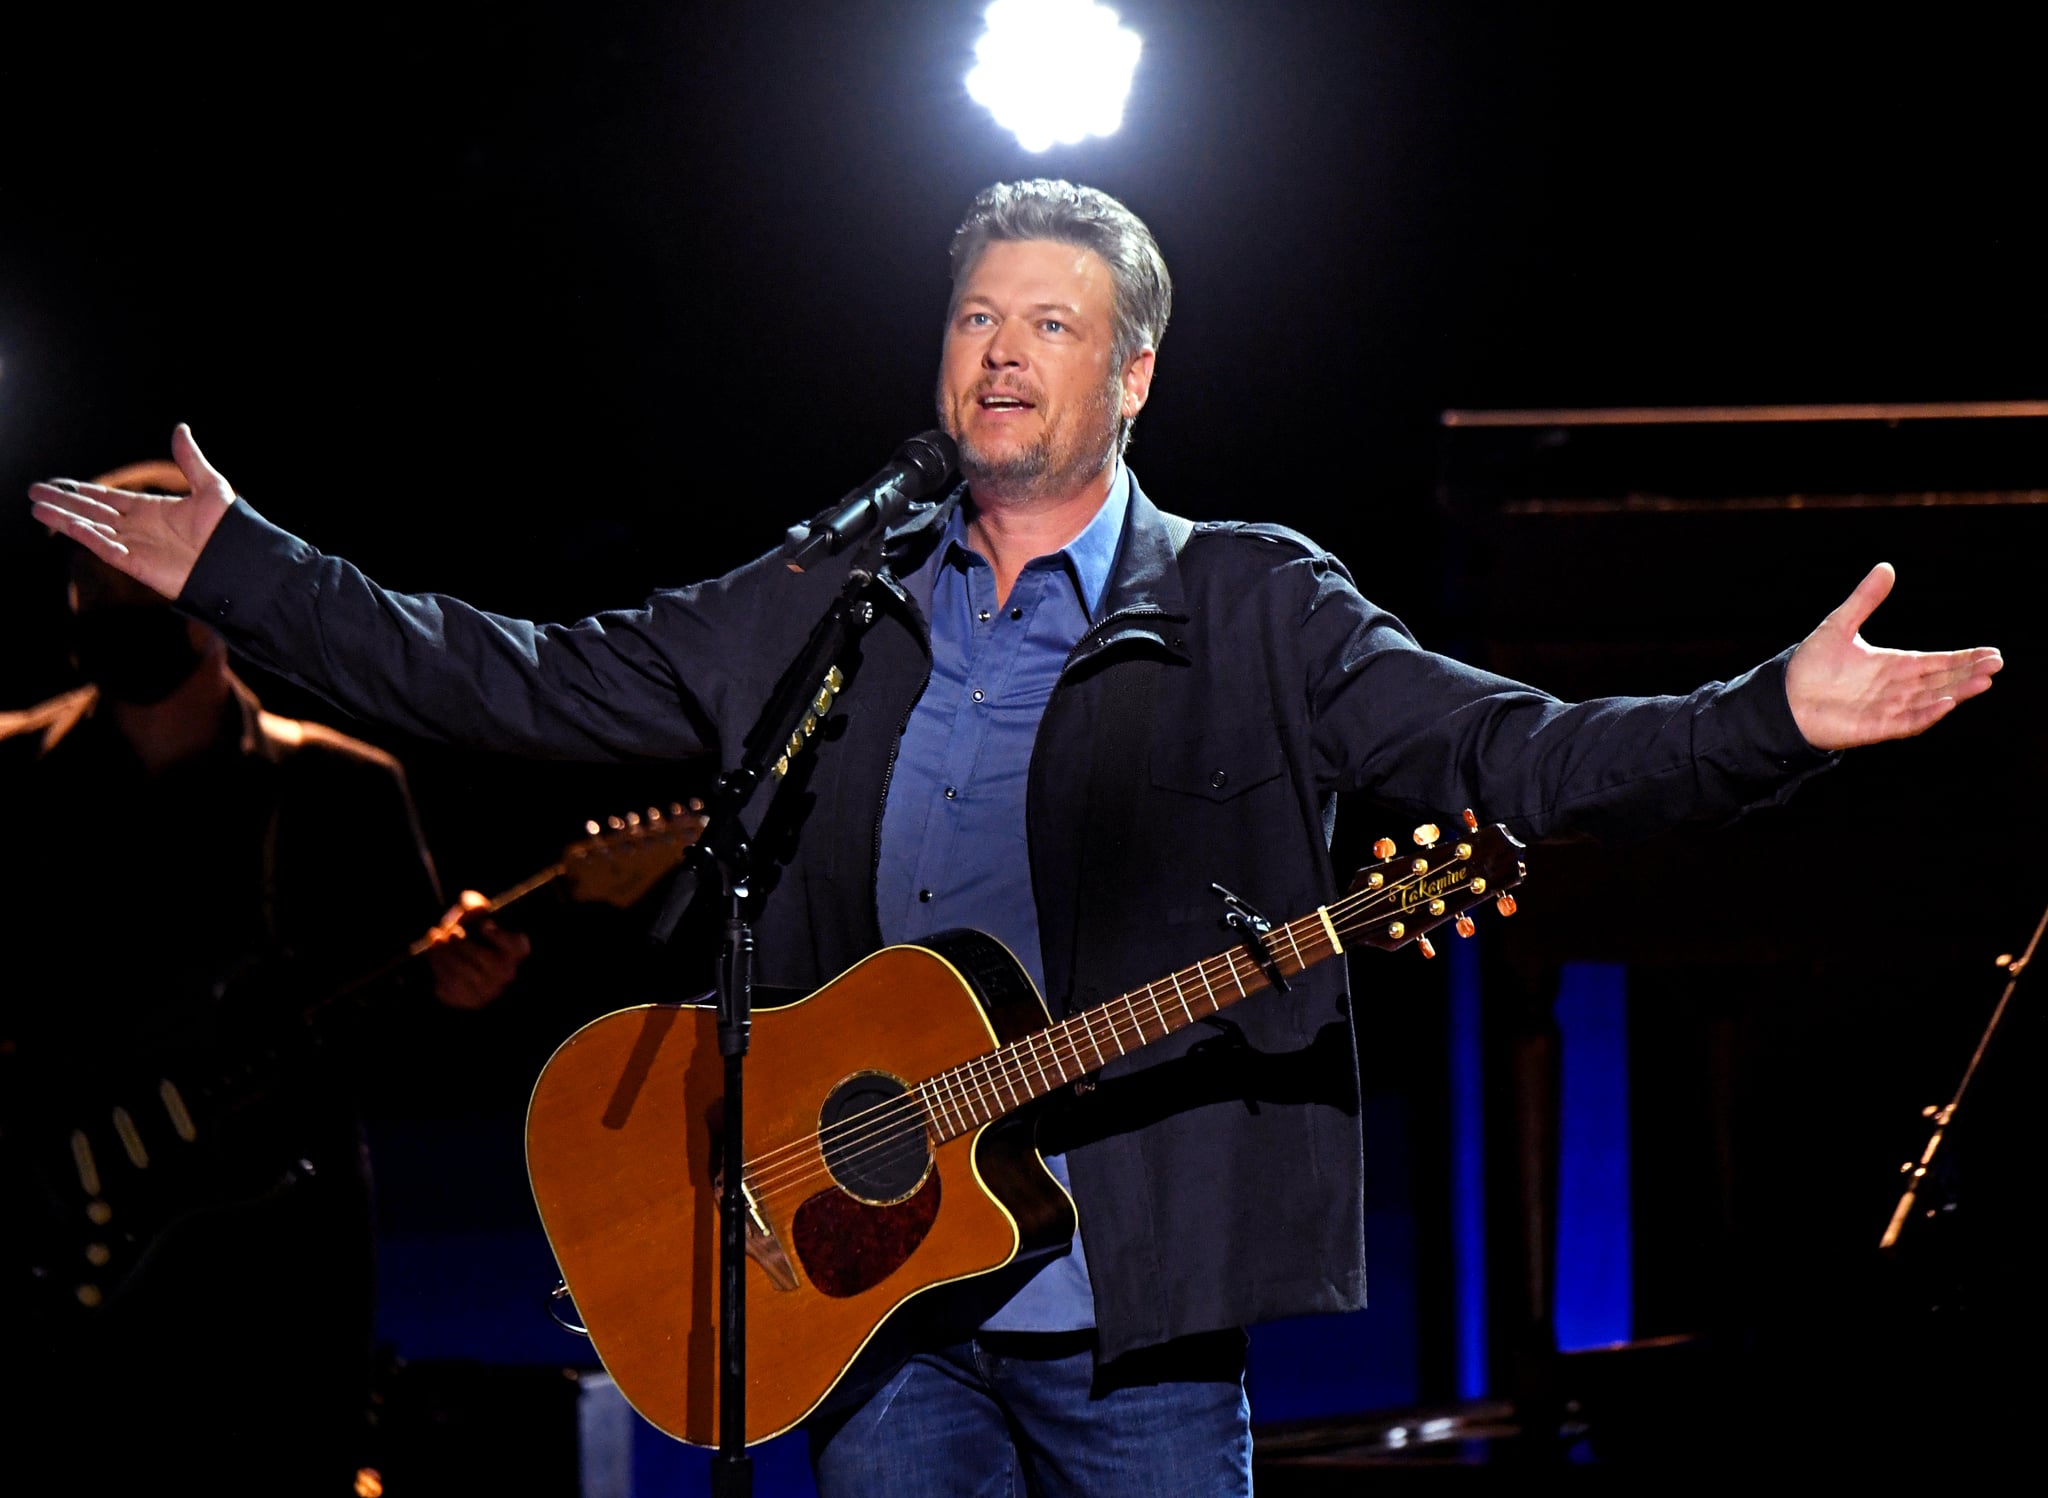 Blake Shelton Announces His Departure From “The Voice”: “I’ve Been Wrestling With This”